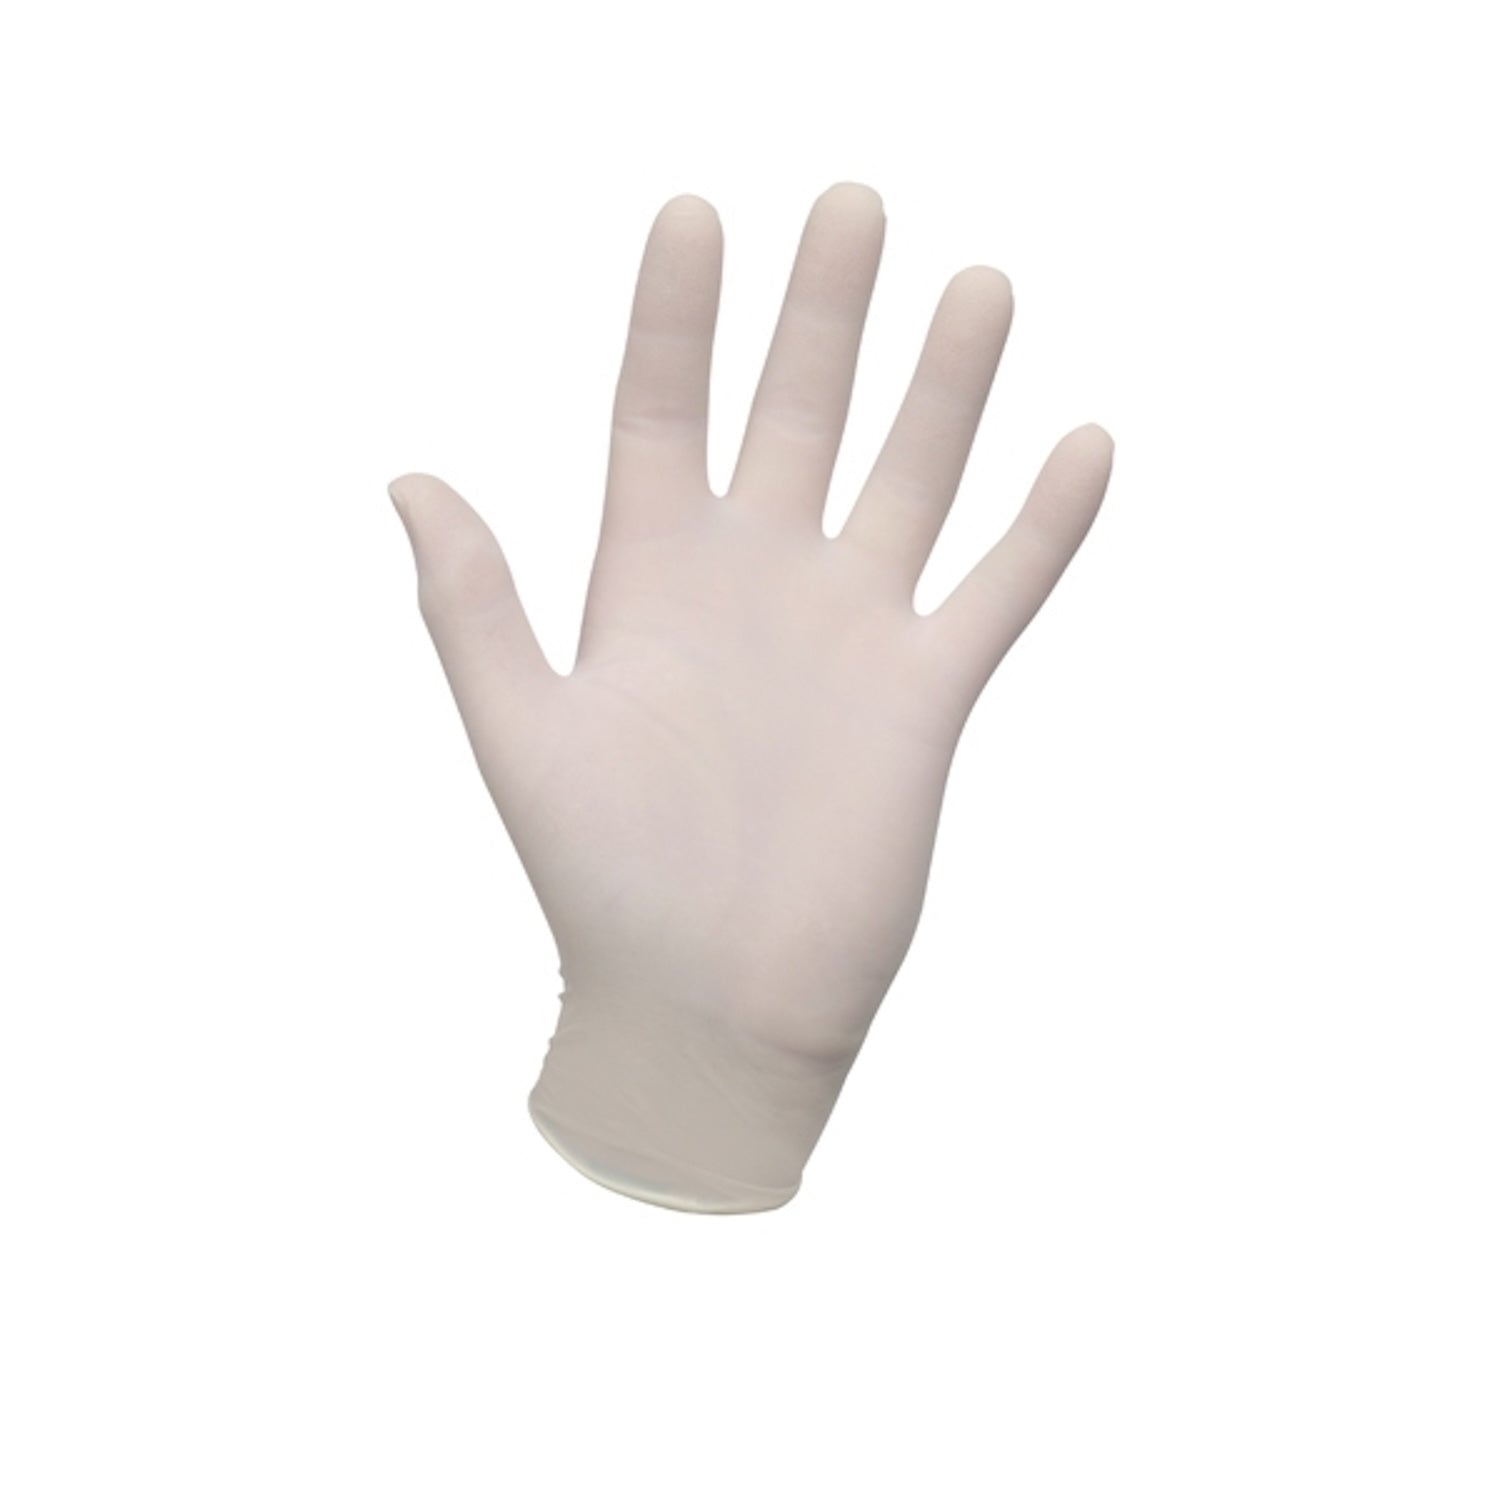 Shermond Premier Protector Latex Gloves | Medium | Pack of 100 Pieces (1)